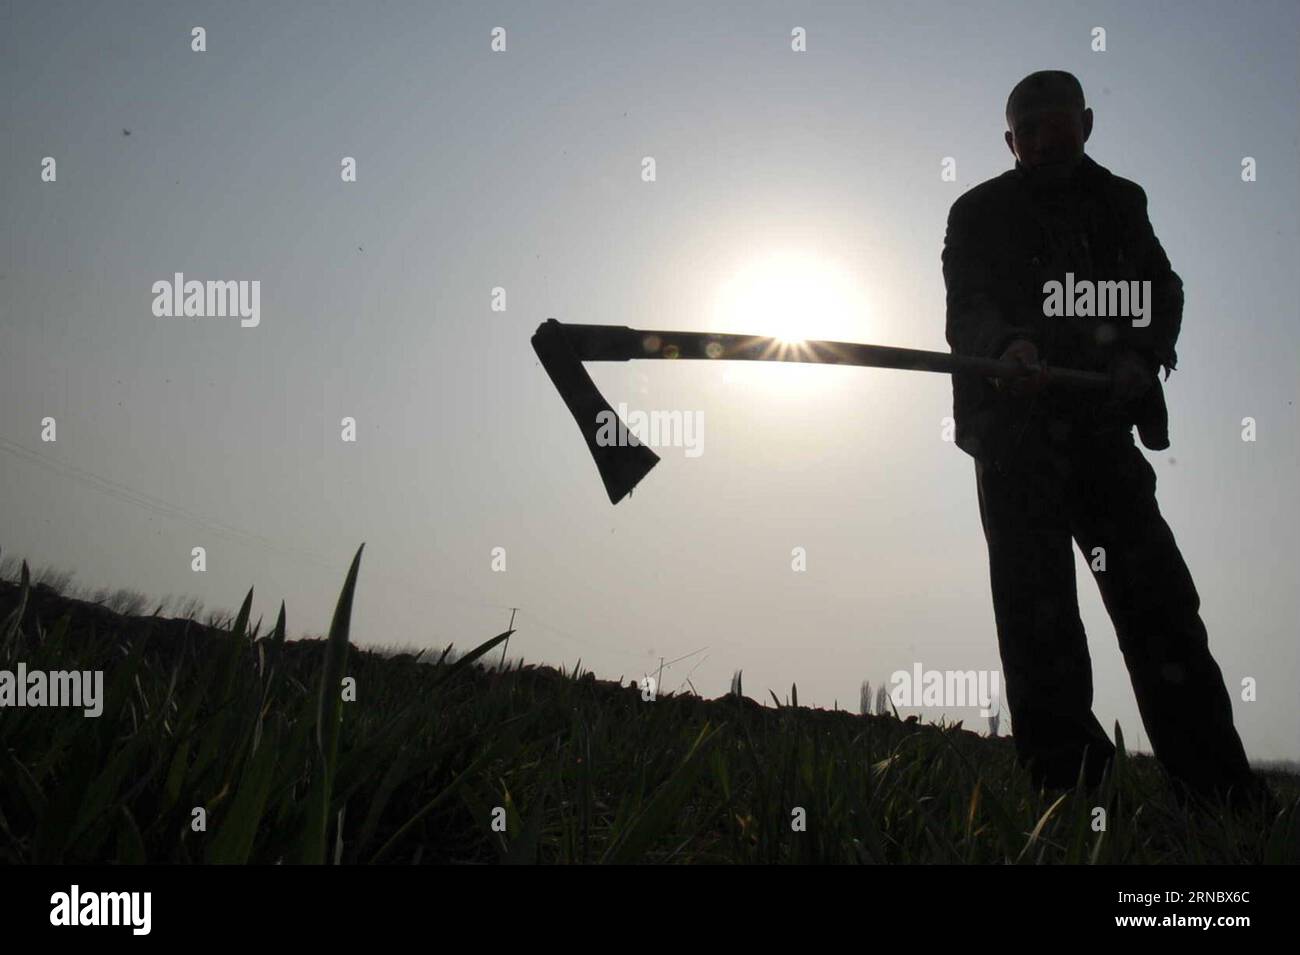 YUNCHENG, March 12, 2016 -- Villager Wang Dianying removes plants with a hoe in his wheat land in Hejin of Yuncheng City, north China s Shanxi Province, March 12, 2016. China is witnessing another growing season as farmers are busy ploughing, irrigating and seeding in their farmlands as the temperature rises in spring. ) (wyl) CHINA-SHANXI-SPRING-FARMING (CN) GaoxXinsheng PUBLICATIONxNOTxINxCHN   Yuncheng March 12 2016 village Wang  removes Plants With a Hoe in His Wheat Country in Hejin of Yuncheng City North China S Shanxi Province March 12 2016 China IS Witnessing Another Growing Season As Stock Photo